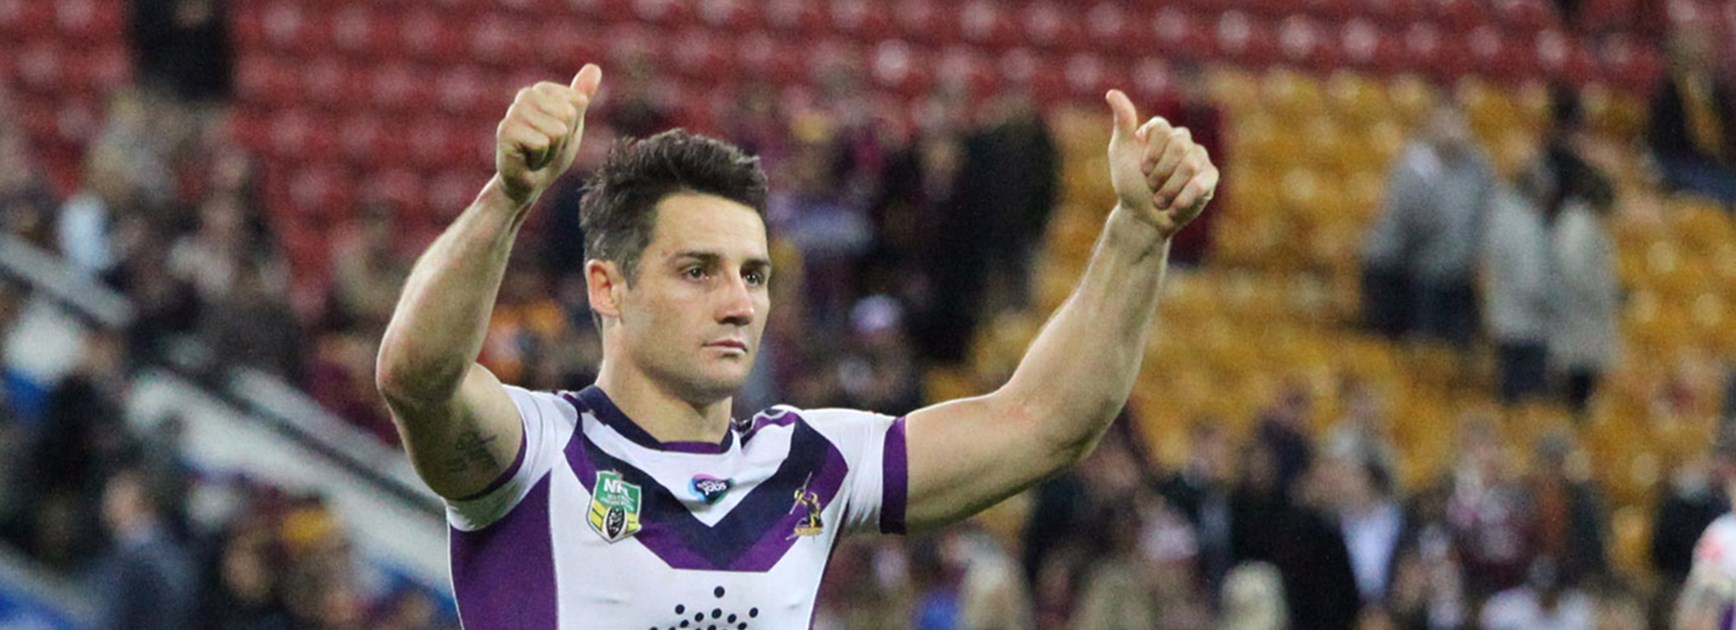 Storm halfback Cooper Cronk salutes the away fans at Suncorp Stadium in Round 17.